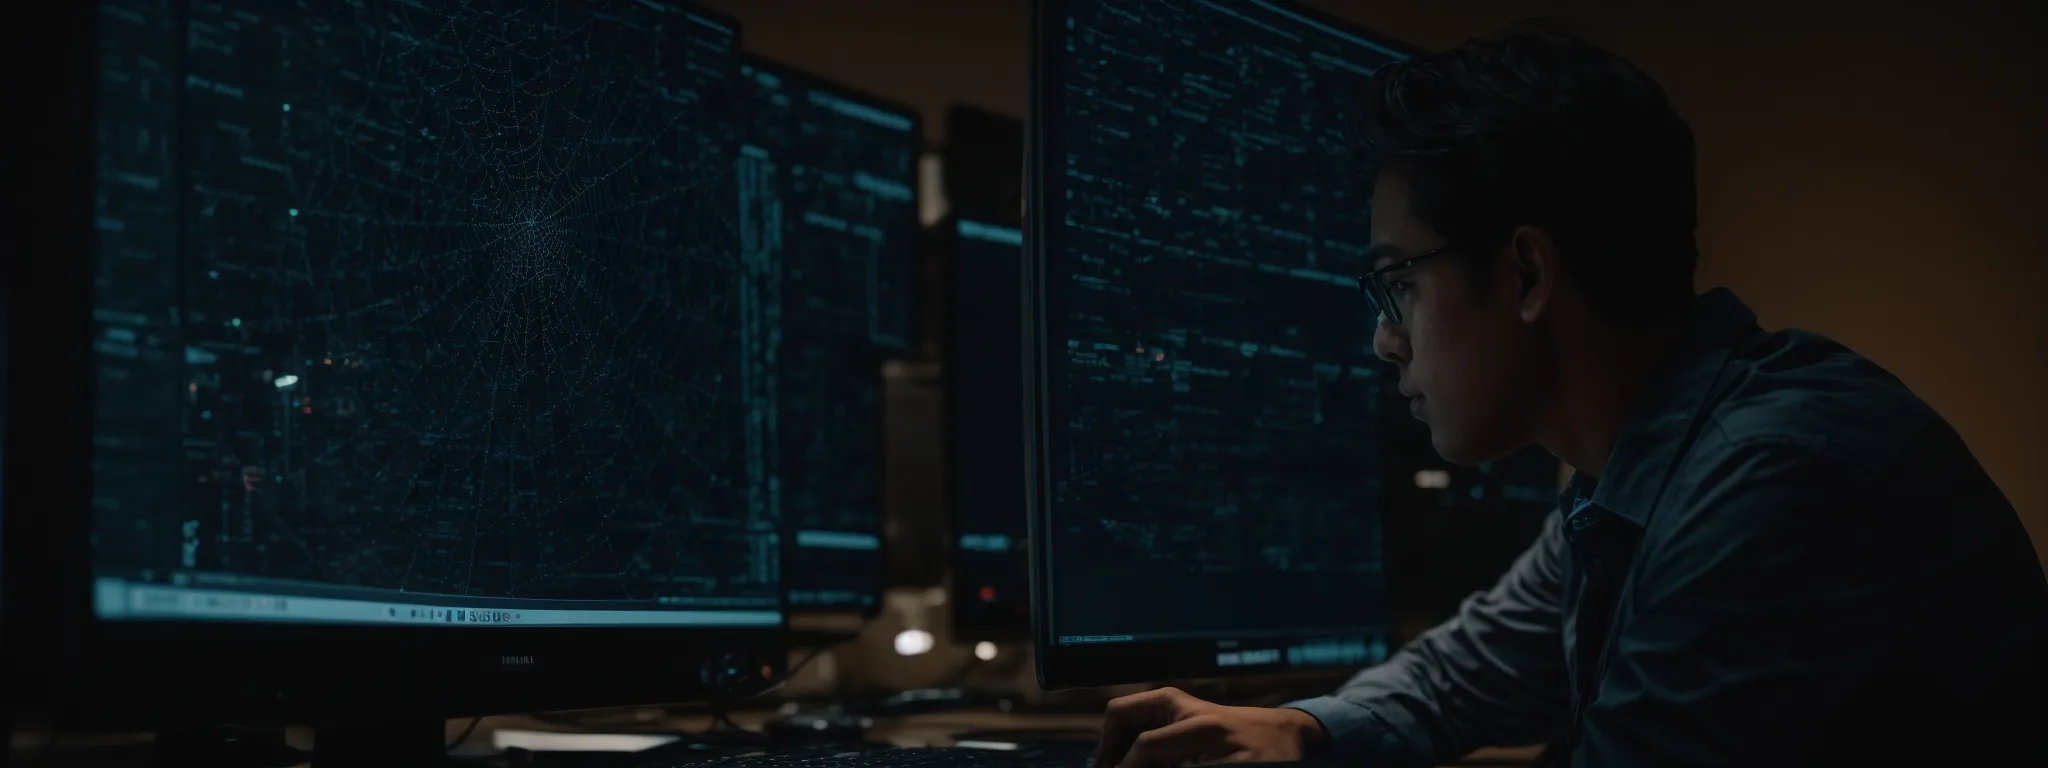 a strategist intently studies a computer screen displaying a complex web of network connections.